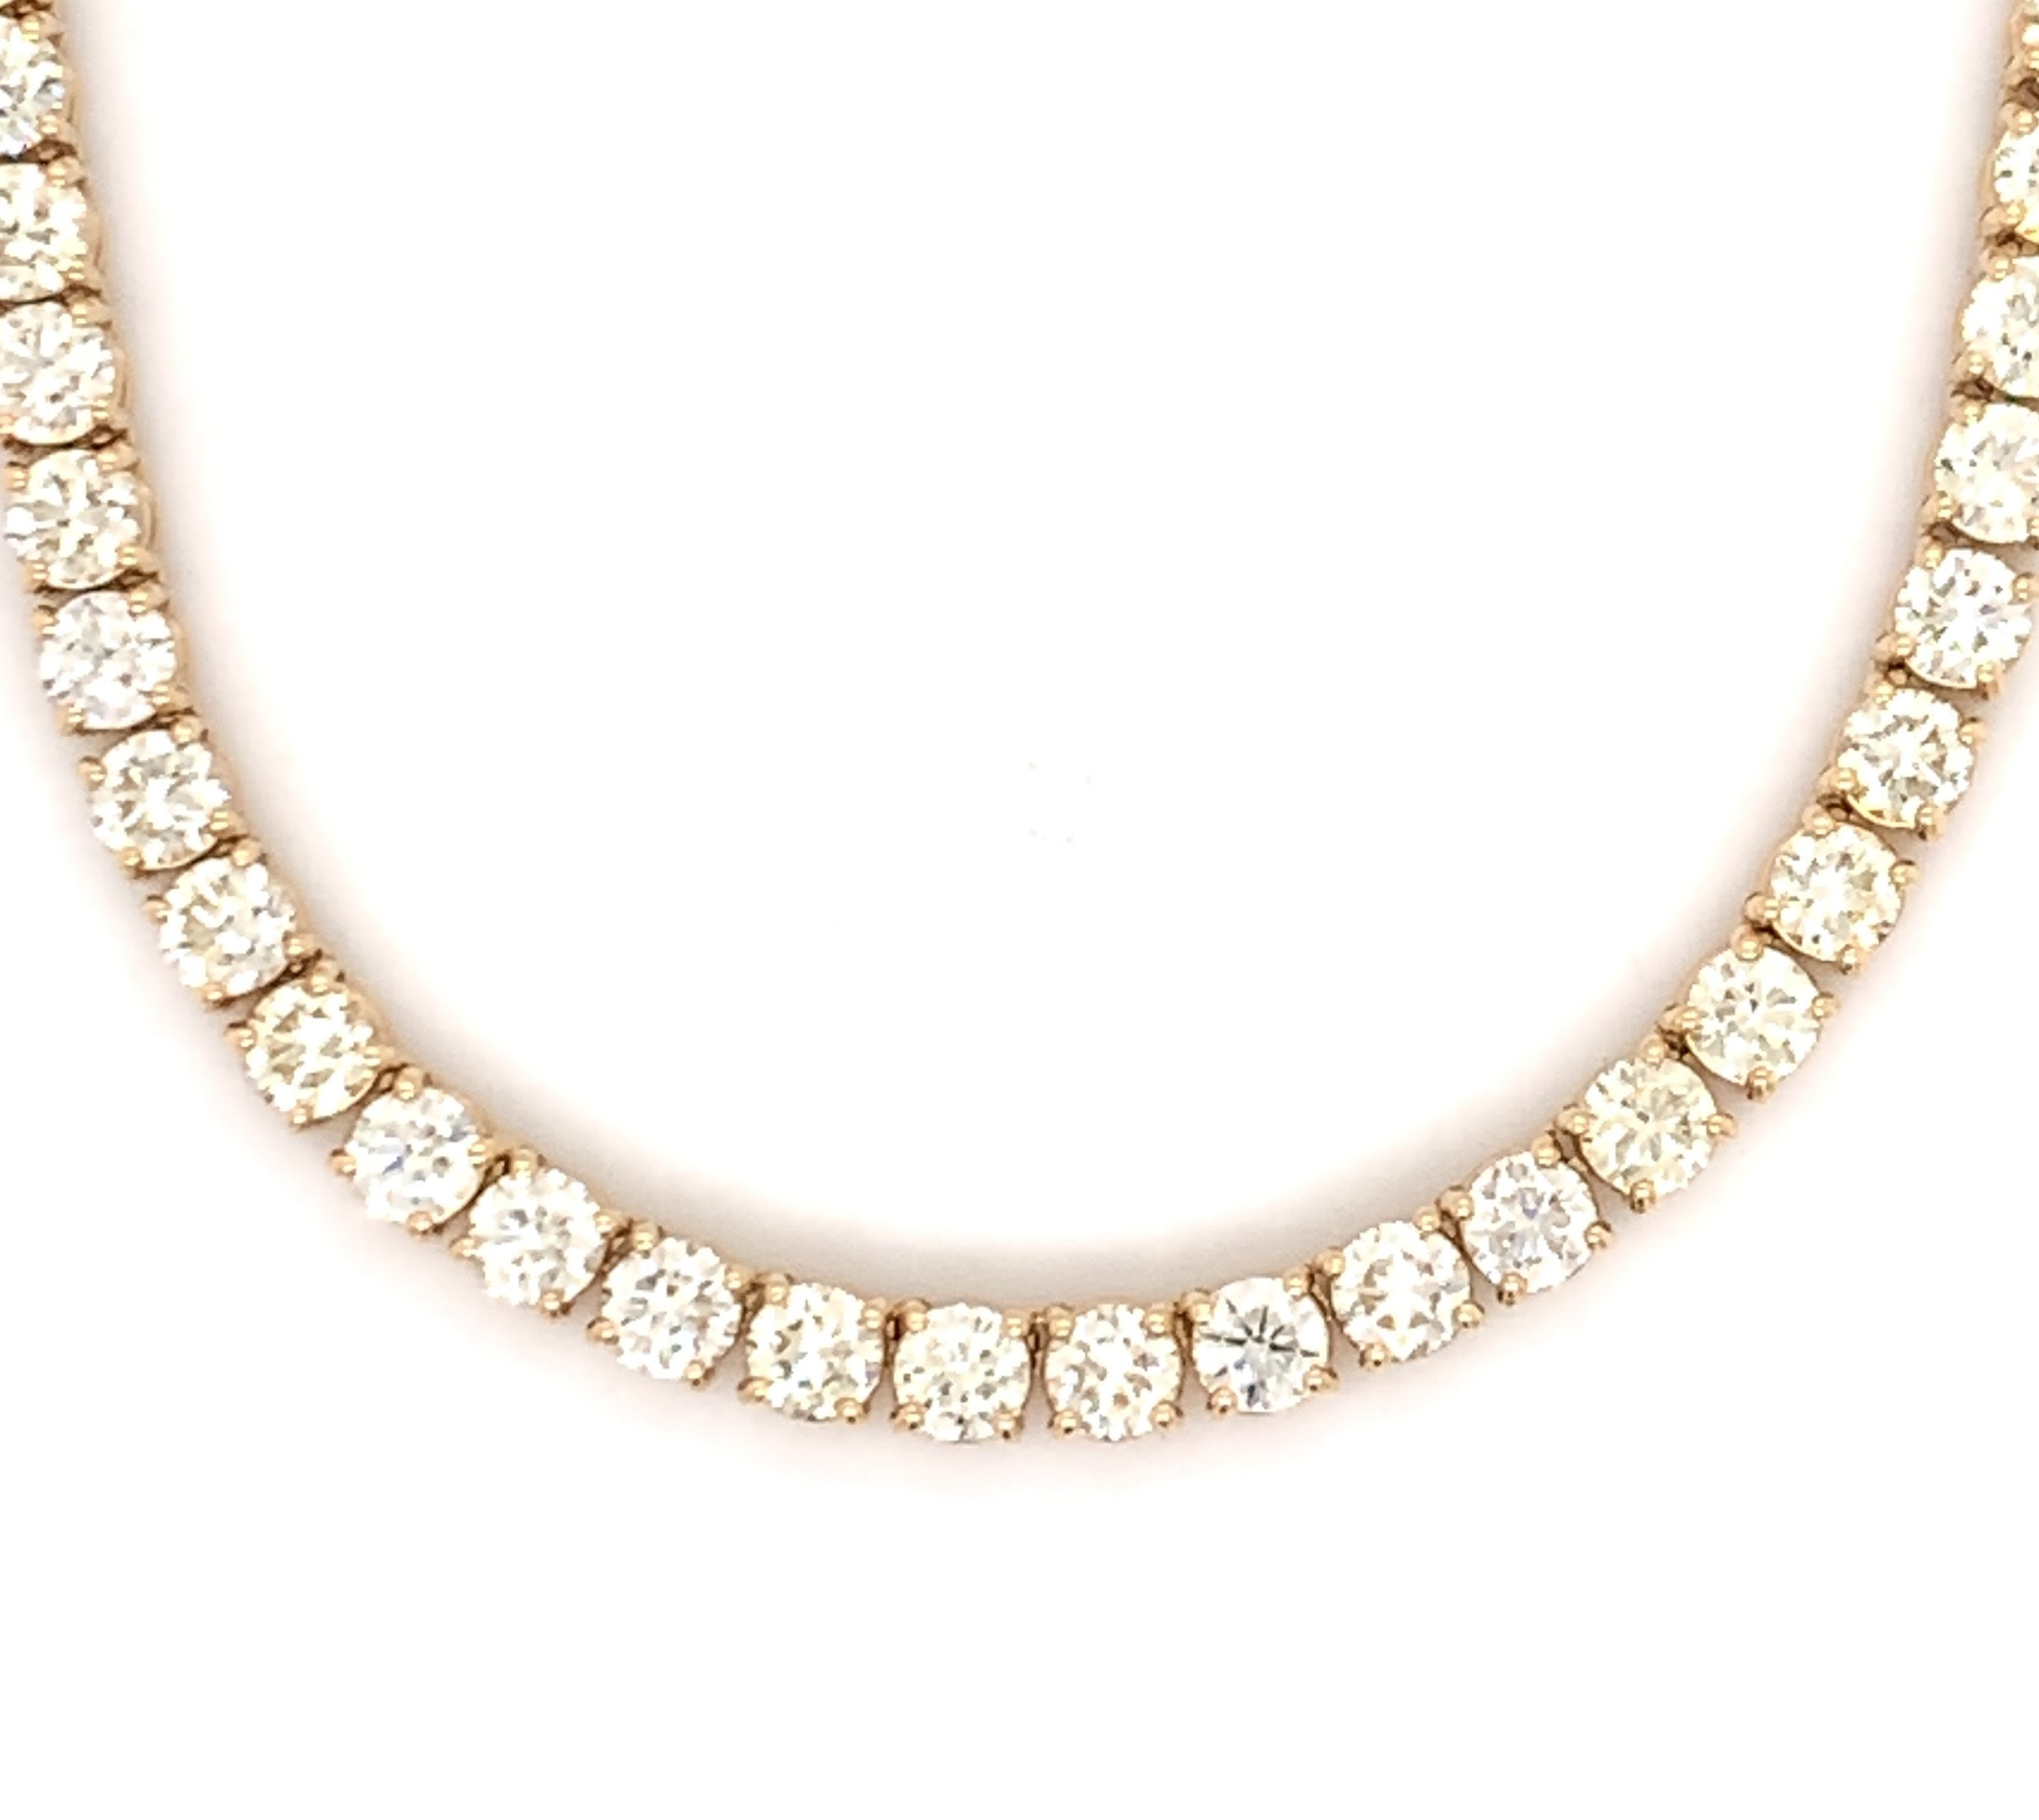 10PT- From 13.50 CT. - 22.00 CT. Tennis Necklace 14K Yellow Gold (4 Prong) - White Carat - USA & Canada